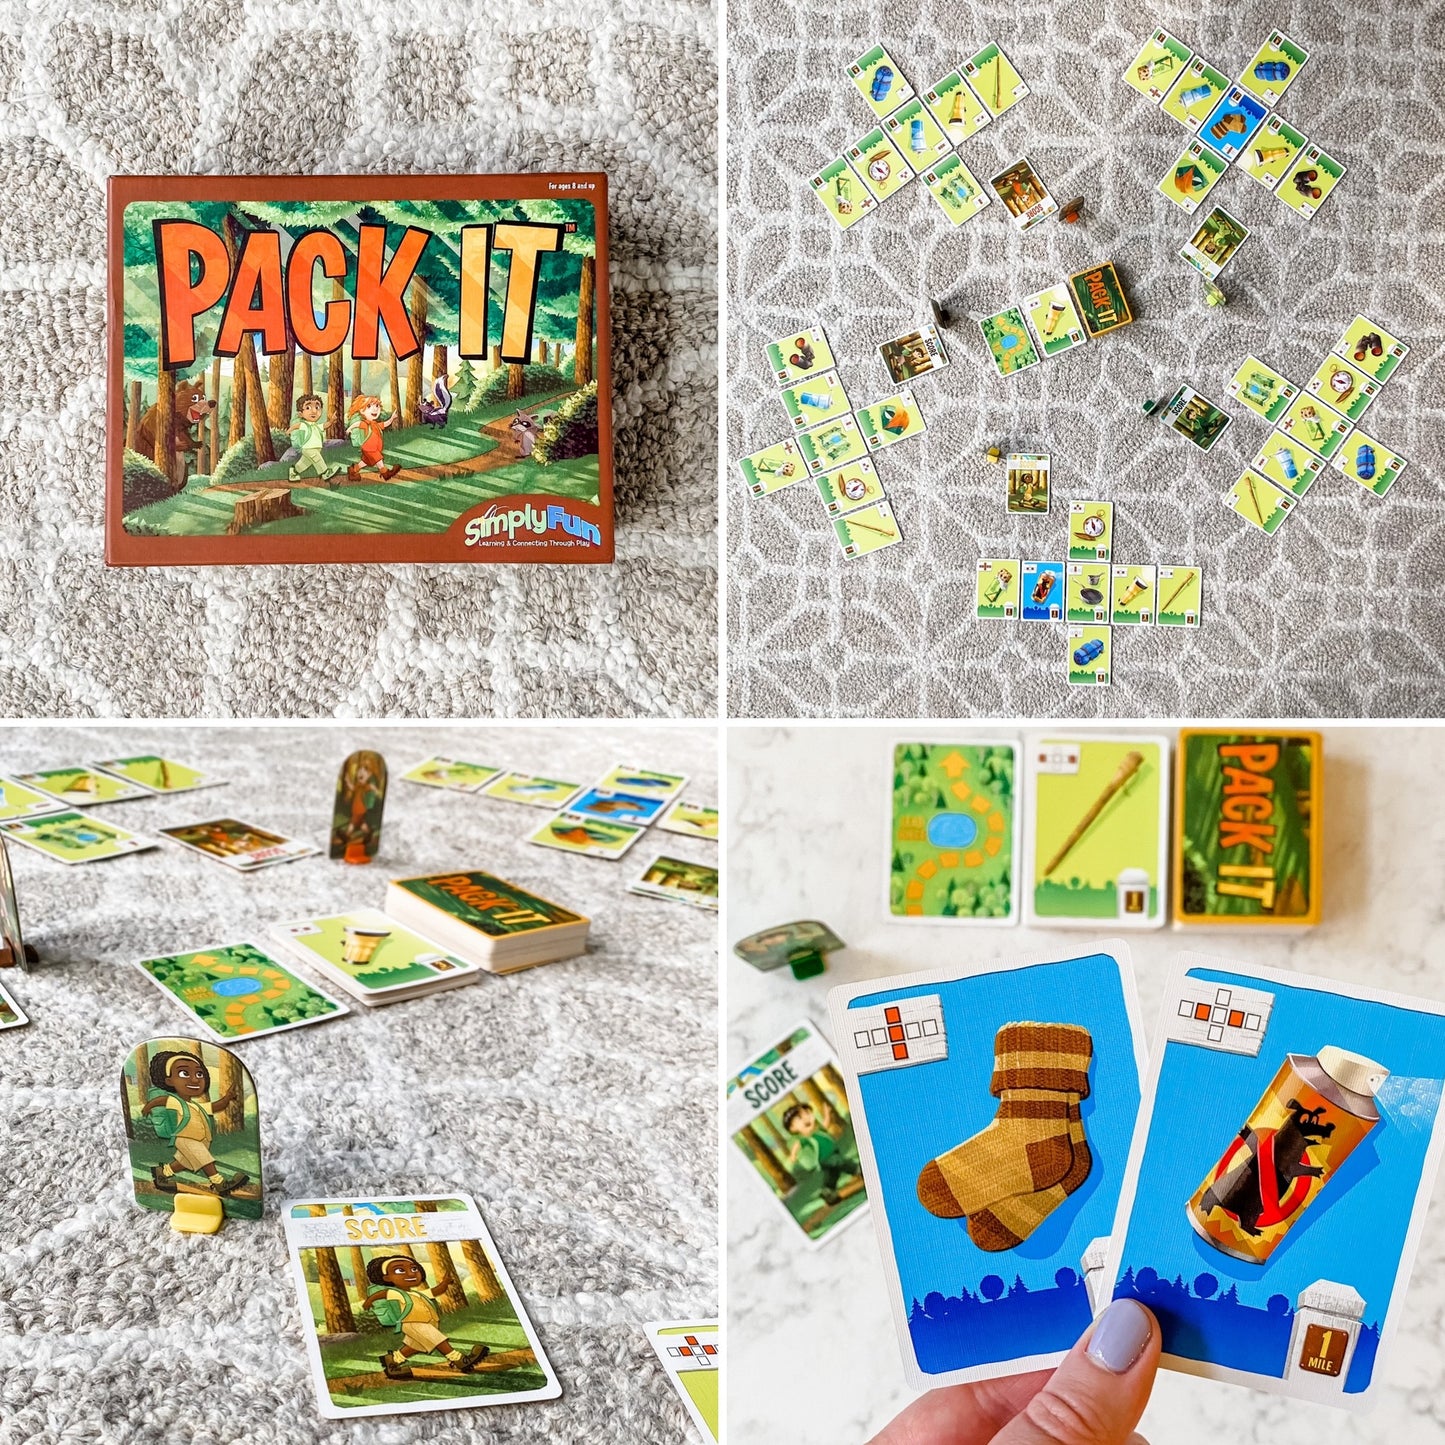 Pack It! strategy card game for ages 8+